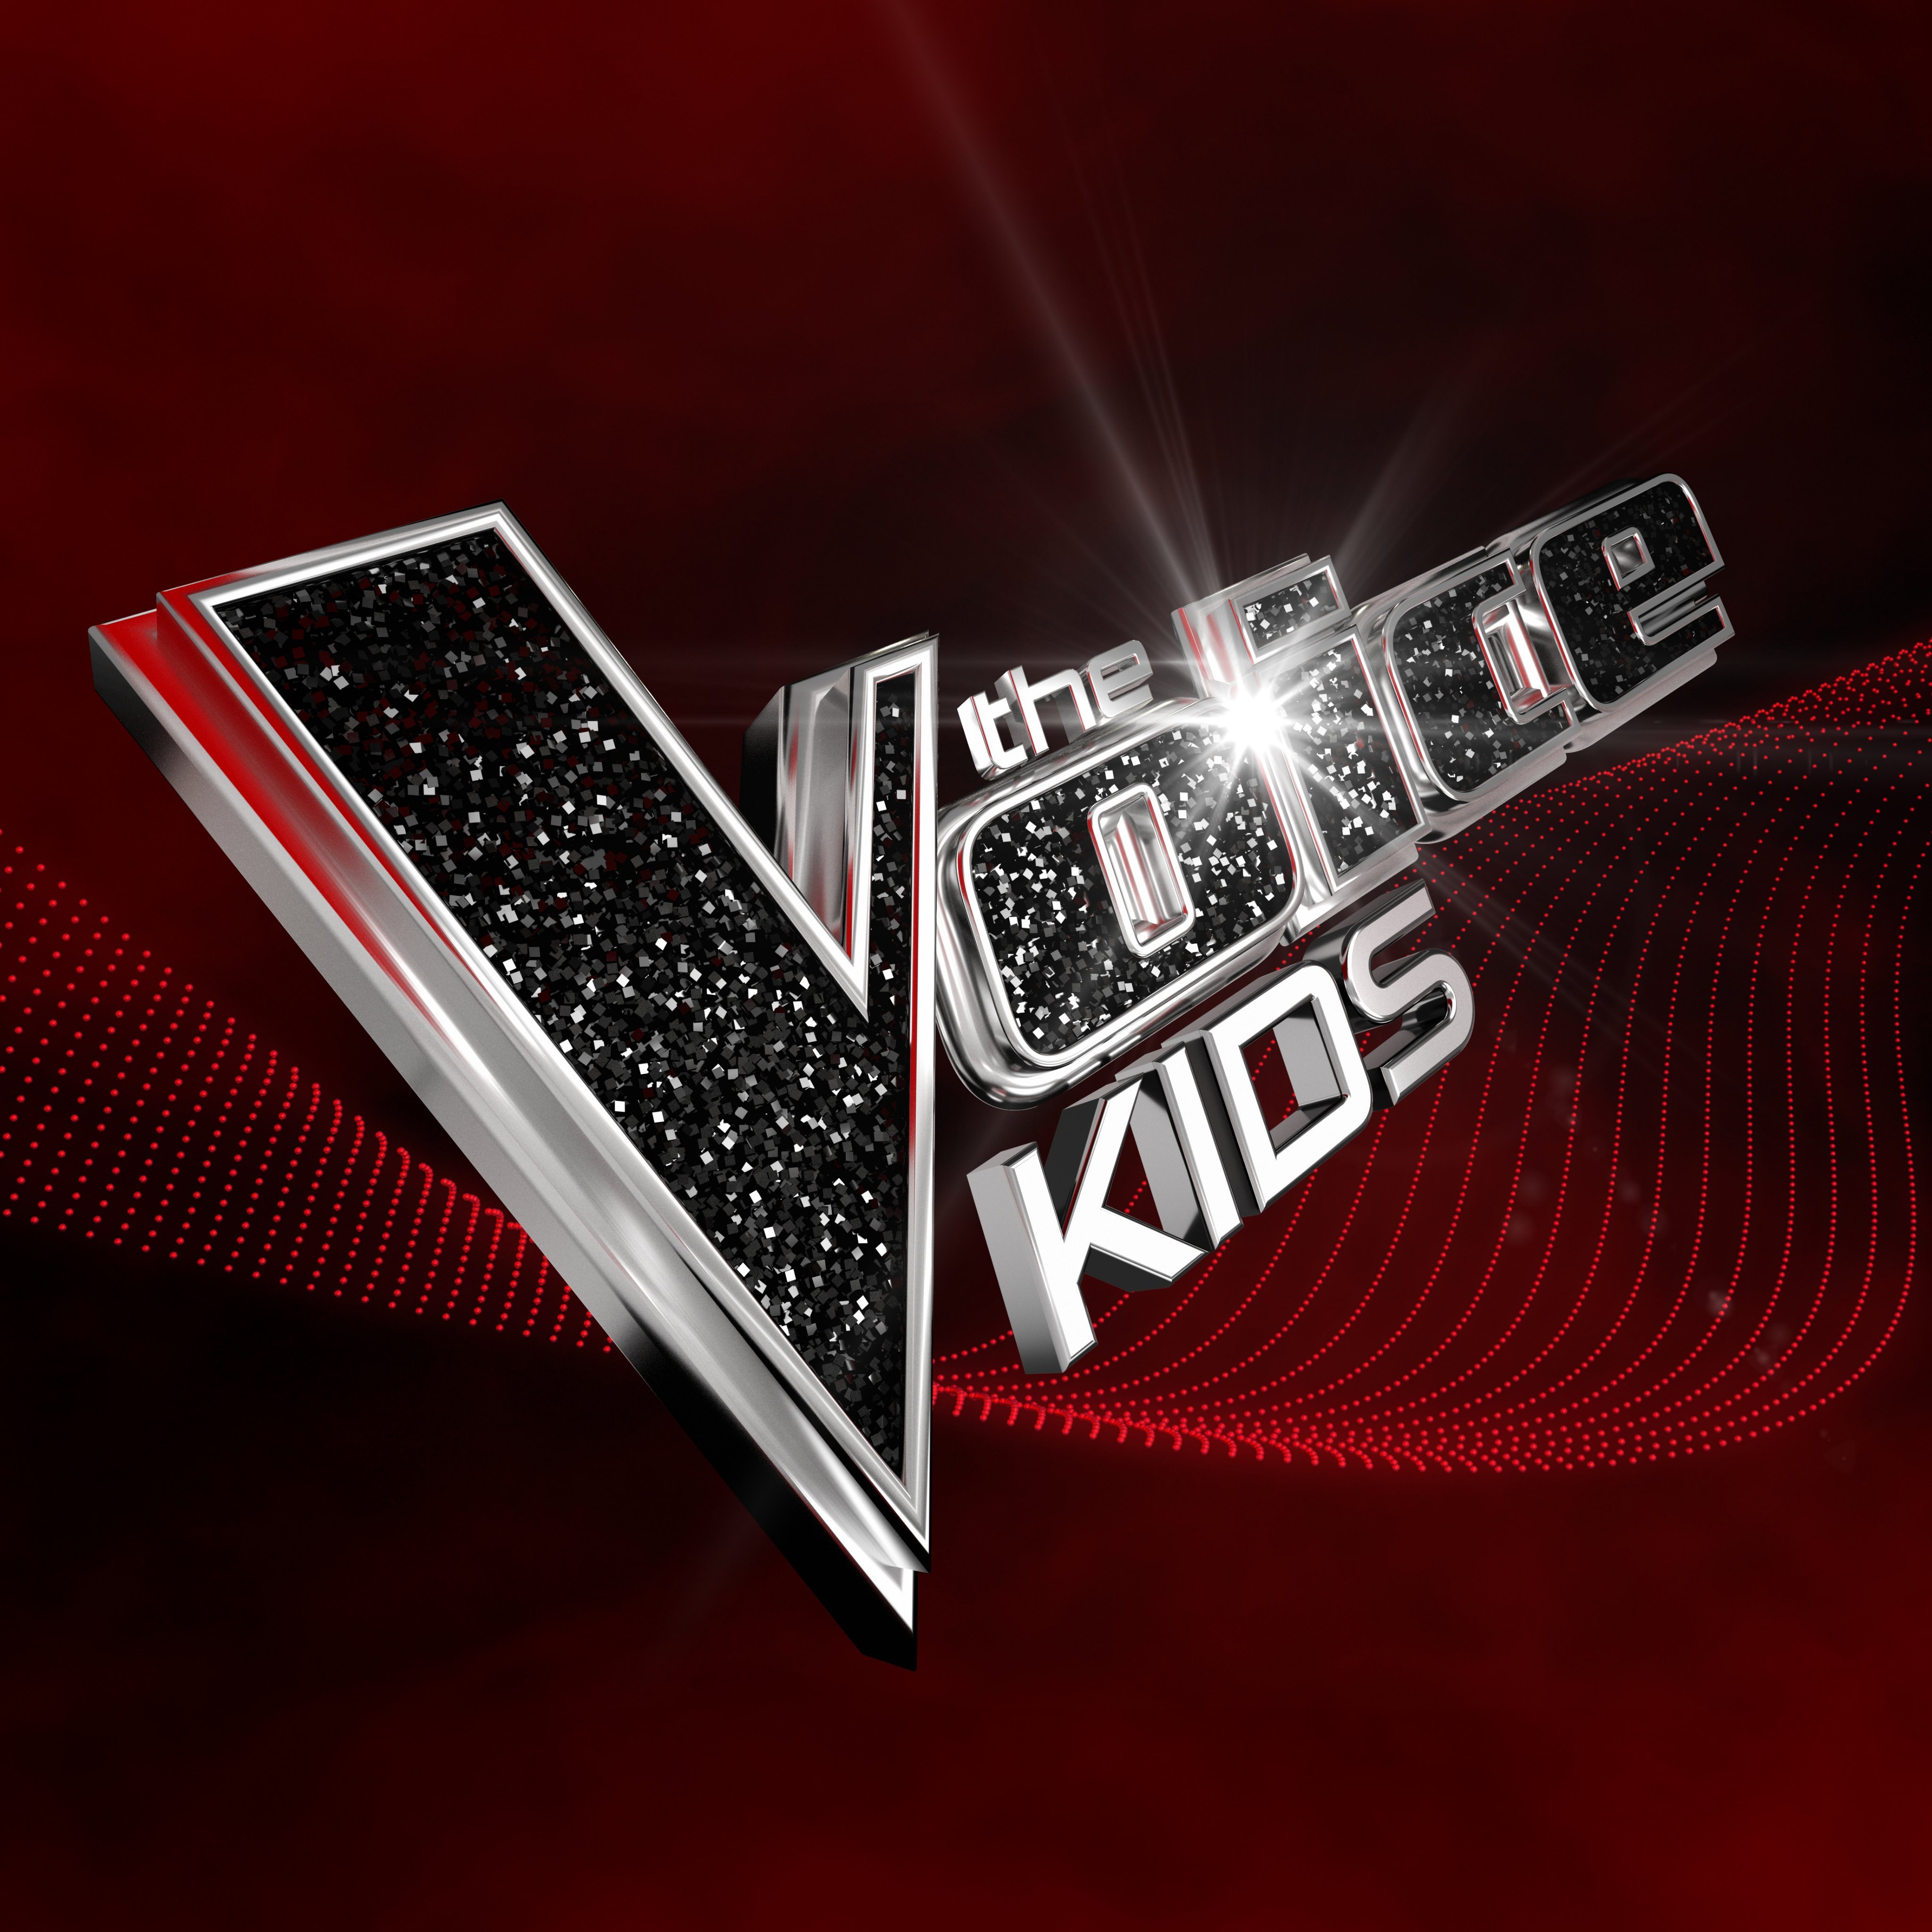 This is The Voice...Kids! The official Twitter home of #TheVoiceKidsUK ✌️